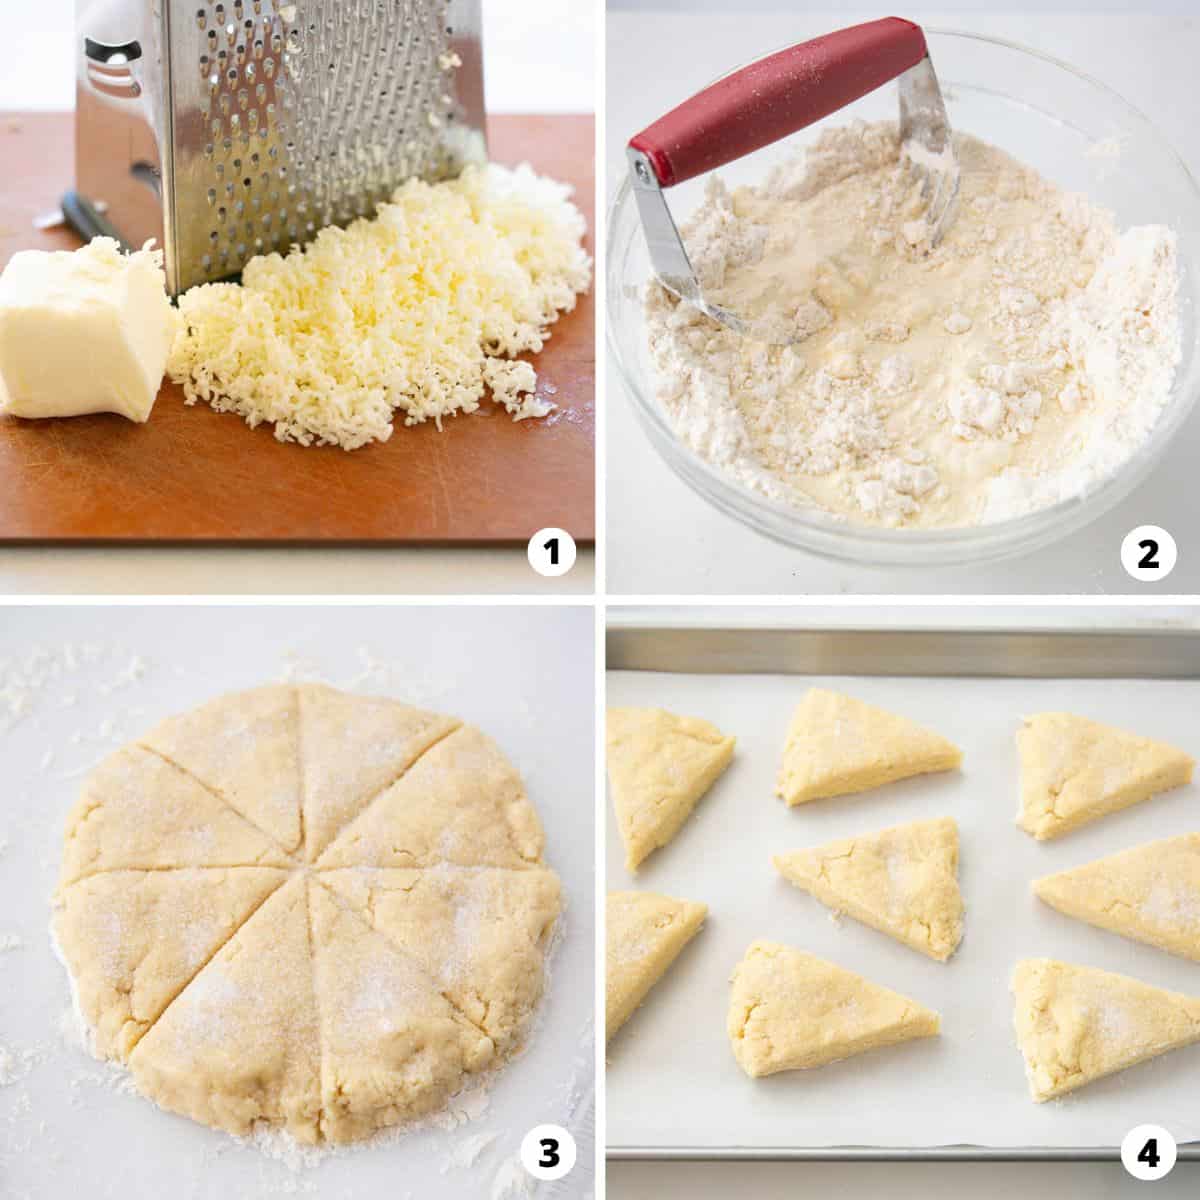 Showing how to make scones in a 4 step collage.